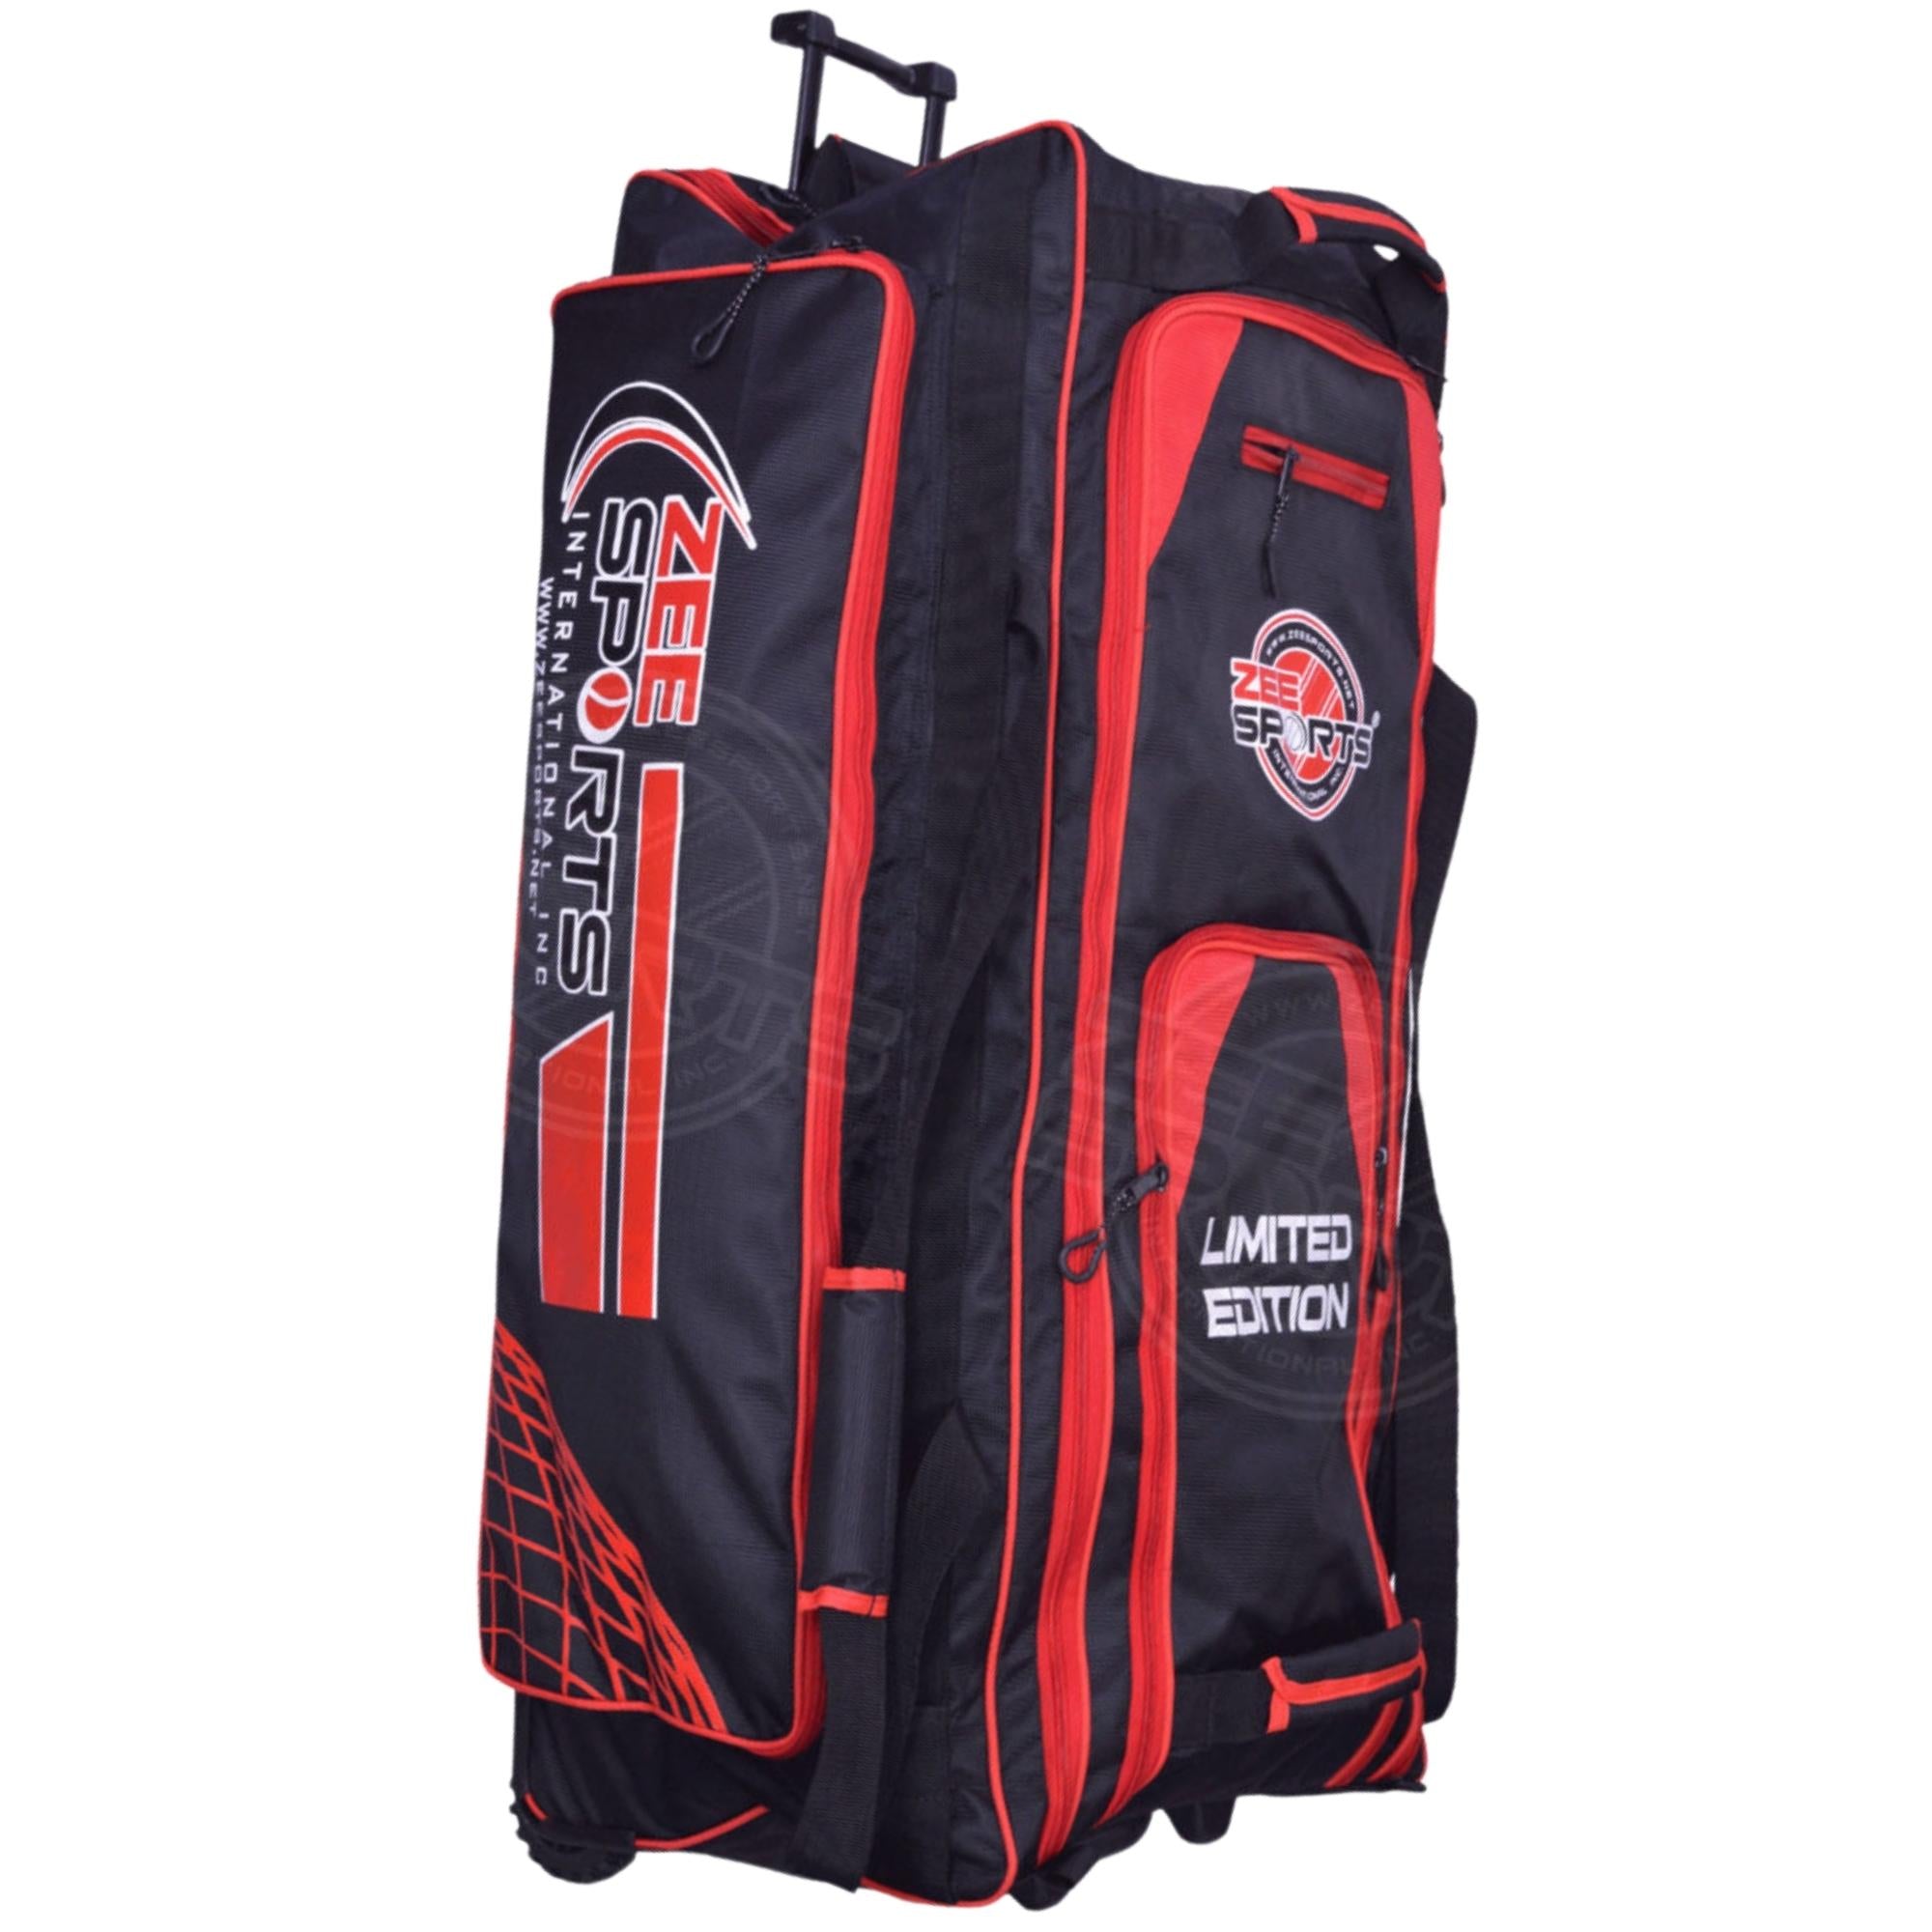 Zee Sports Limited Edition Kit Bag with Ice Box